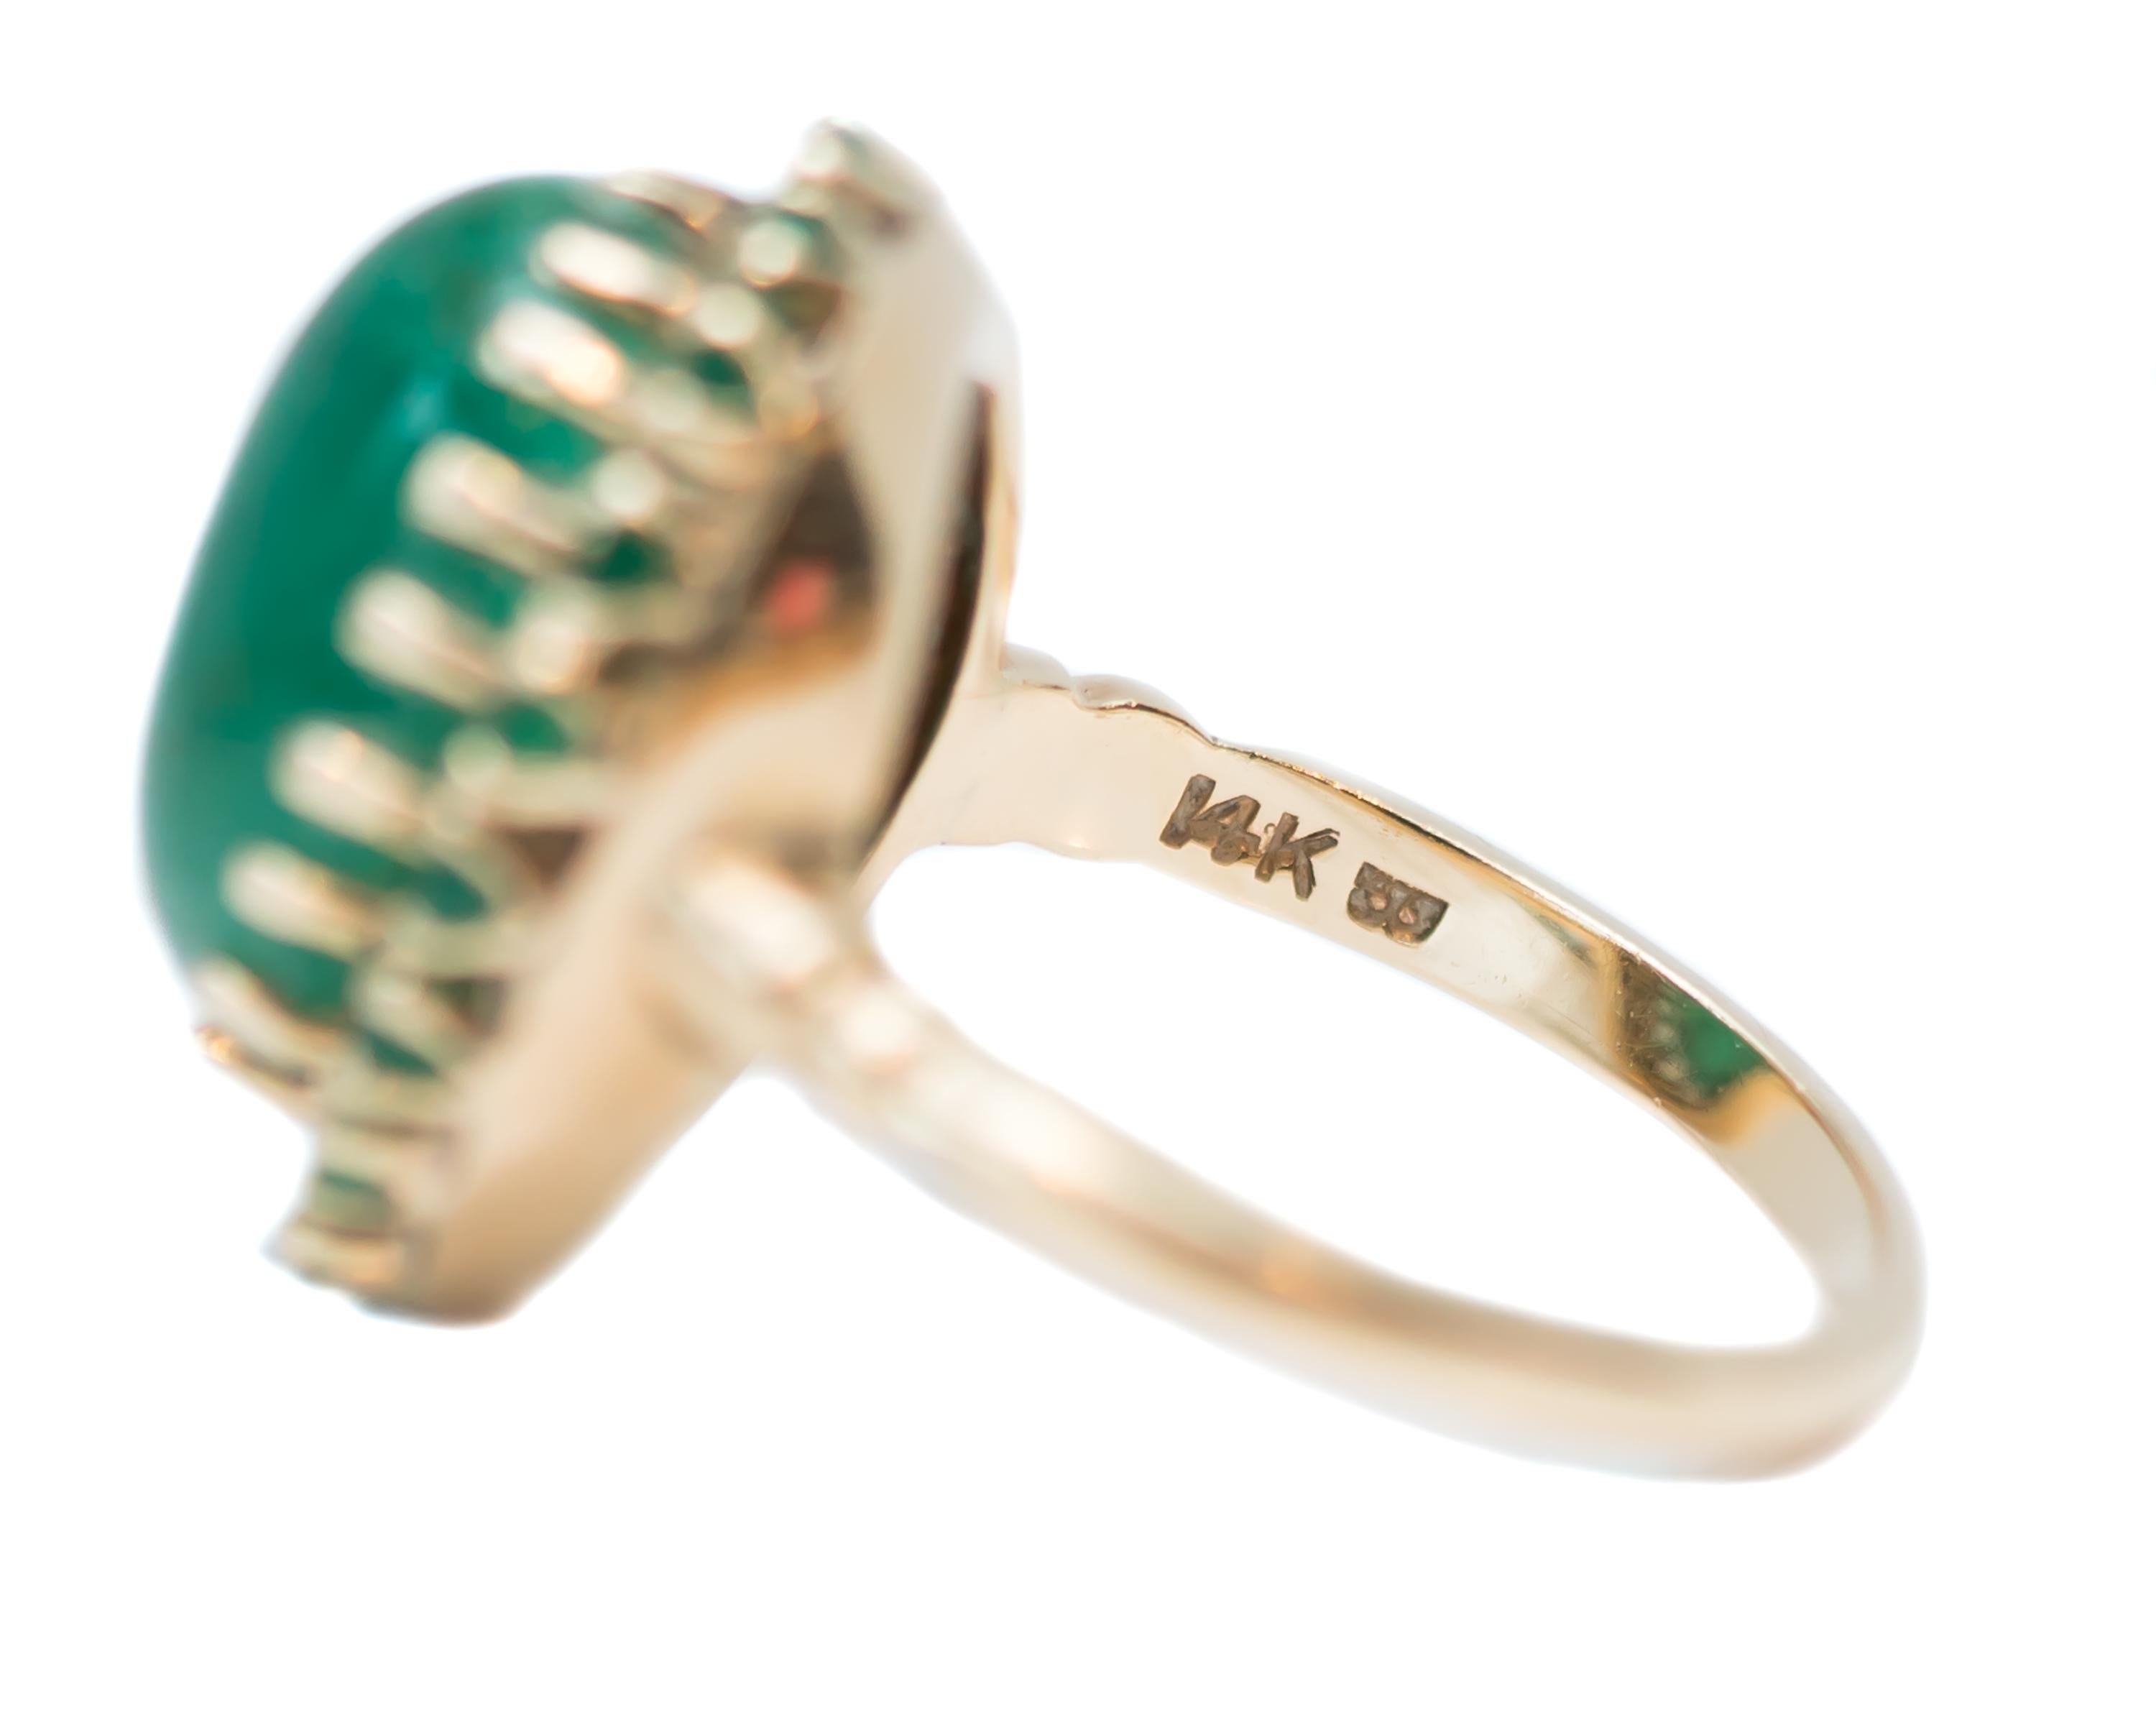 Women's 1960s 5 Carat Total Emerald Cabochon with Halo Ring in 14 Karat Yellow Gold